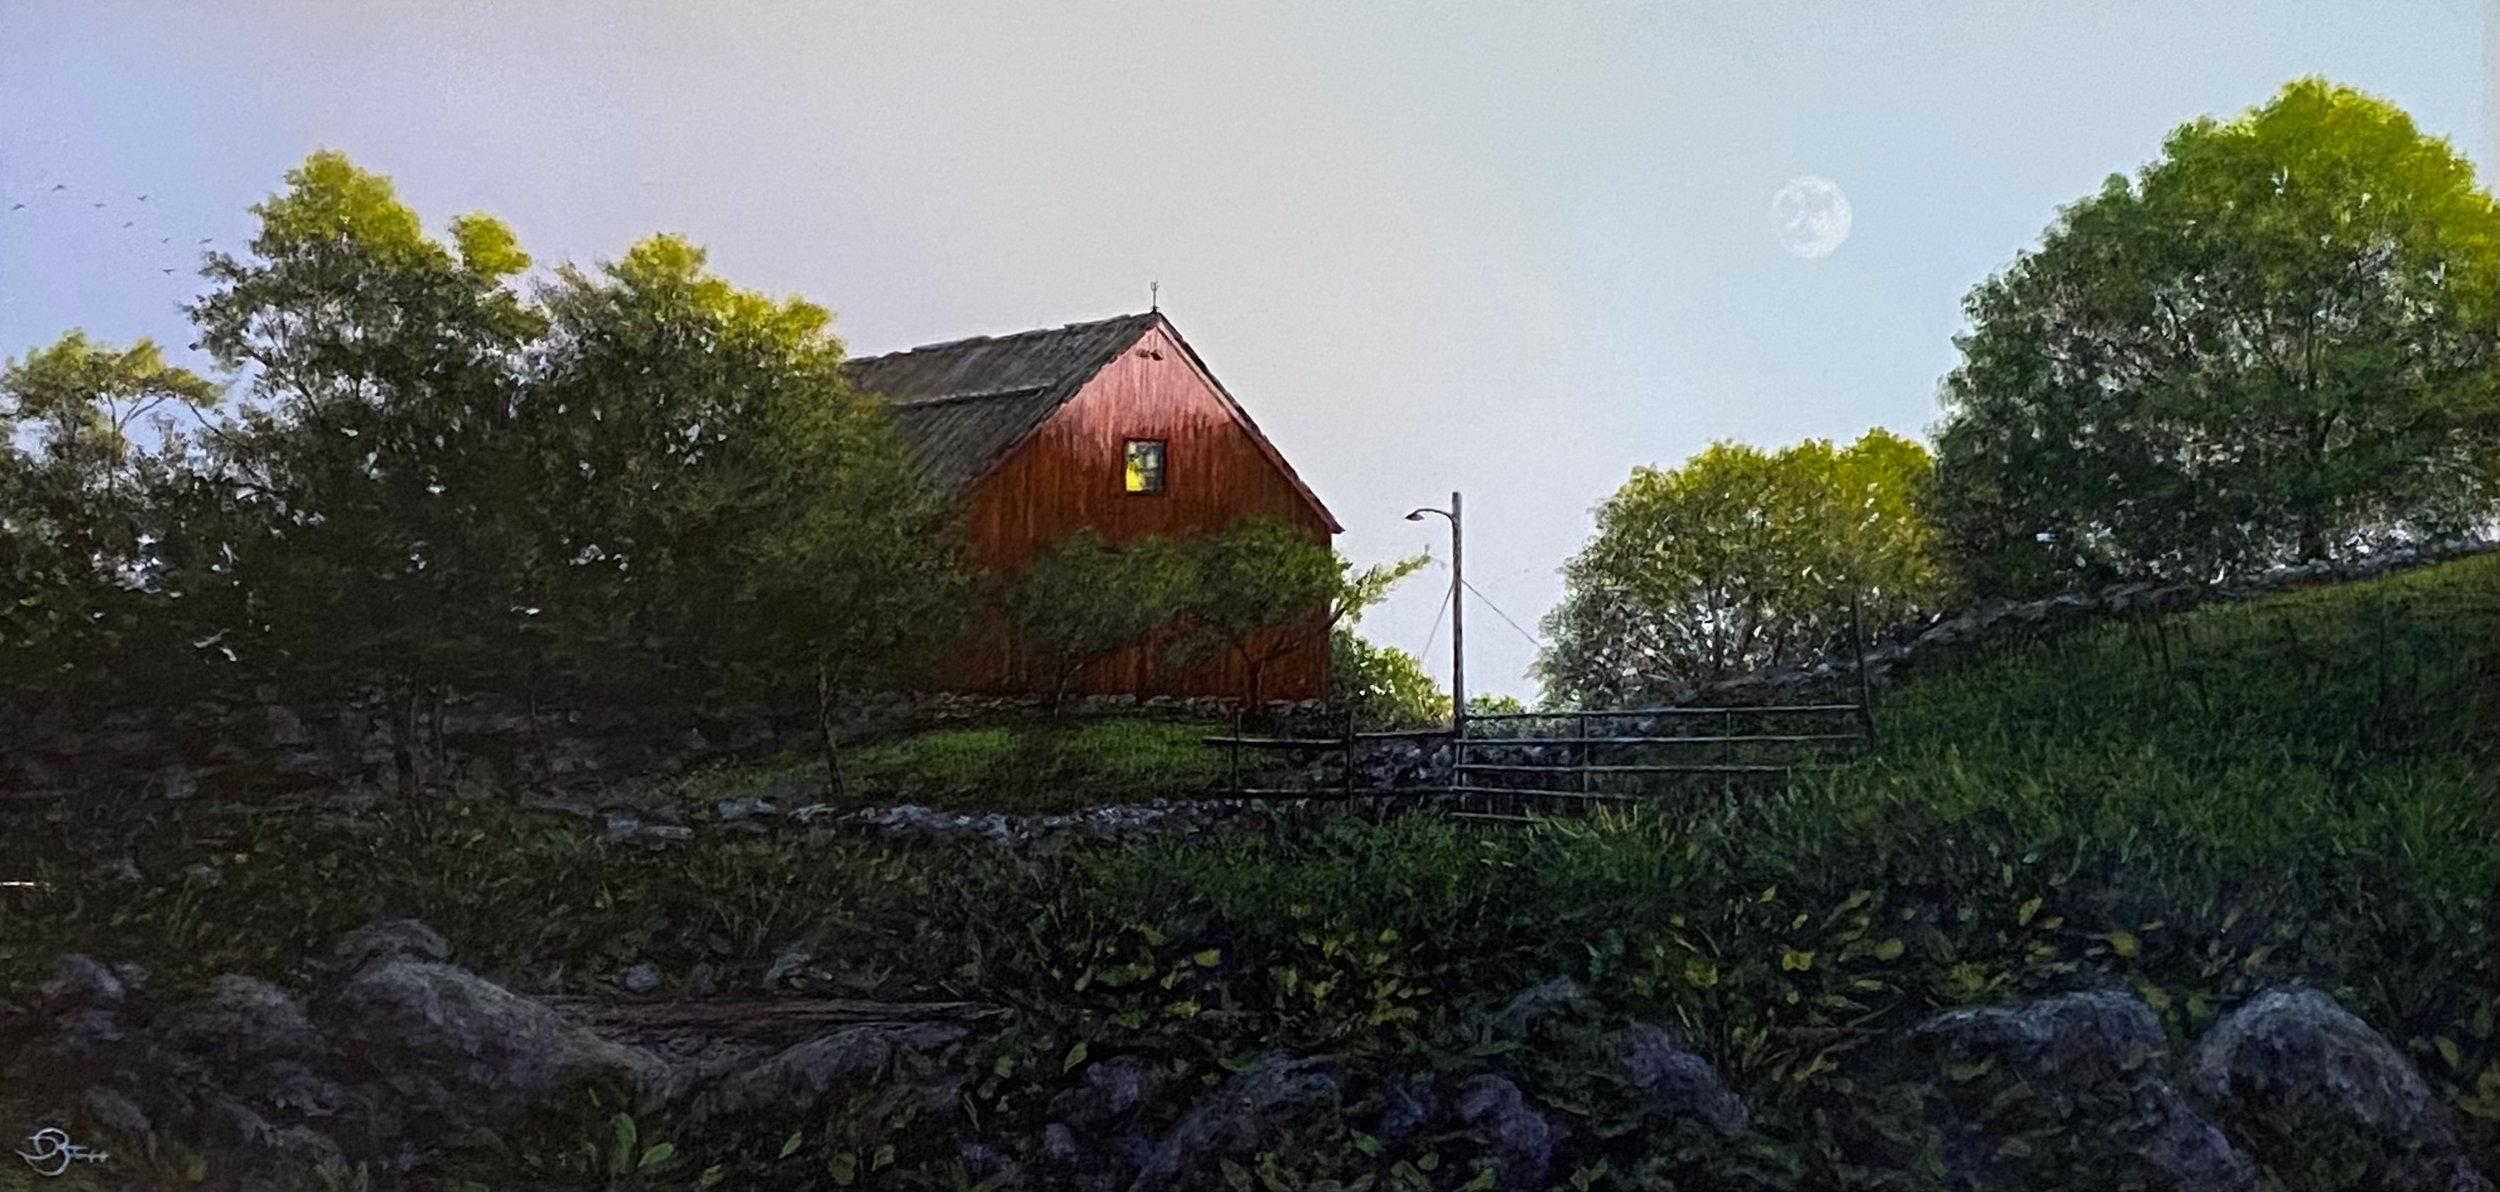 This piece, "Summerhill", is a 12x24 acrylic painting on board by artist Del Bourree Bach featuring quiet rural landscape. The moon slowly begins to rise in this late afternoon scene as light from a setting sun catches the gable of a red rustic